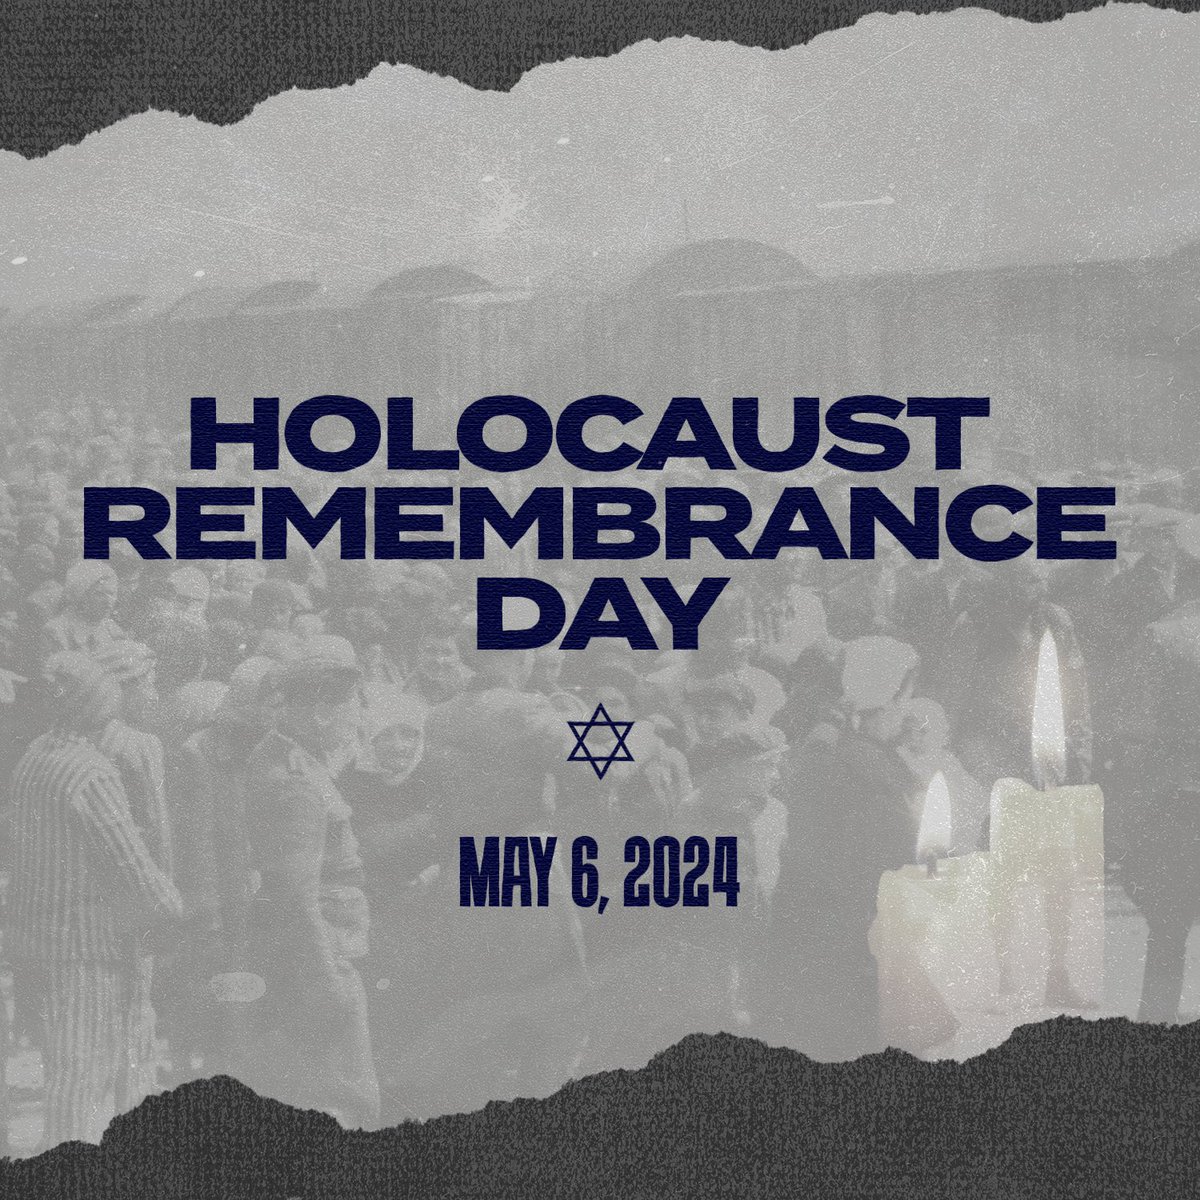 Today, we honor and remember the six million Jews murdered in the Holocaust. Never Again is Now.